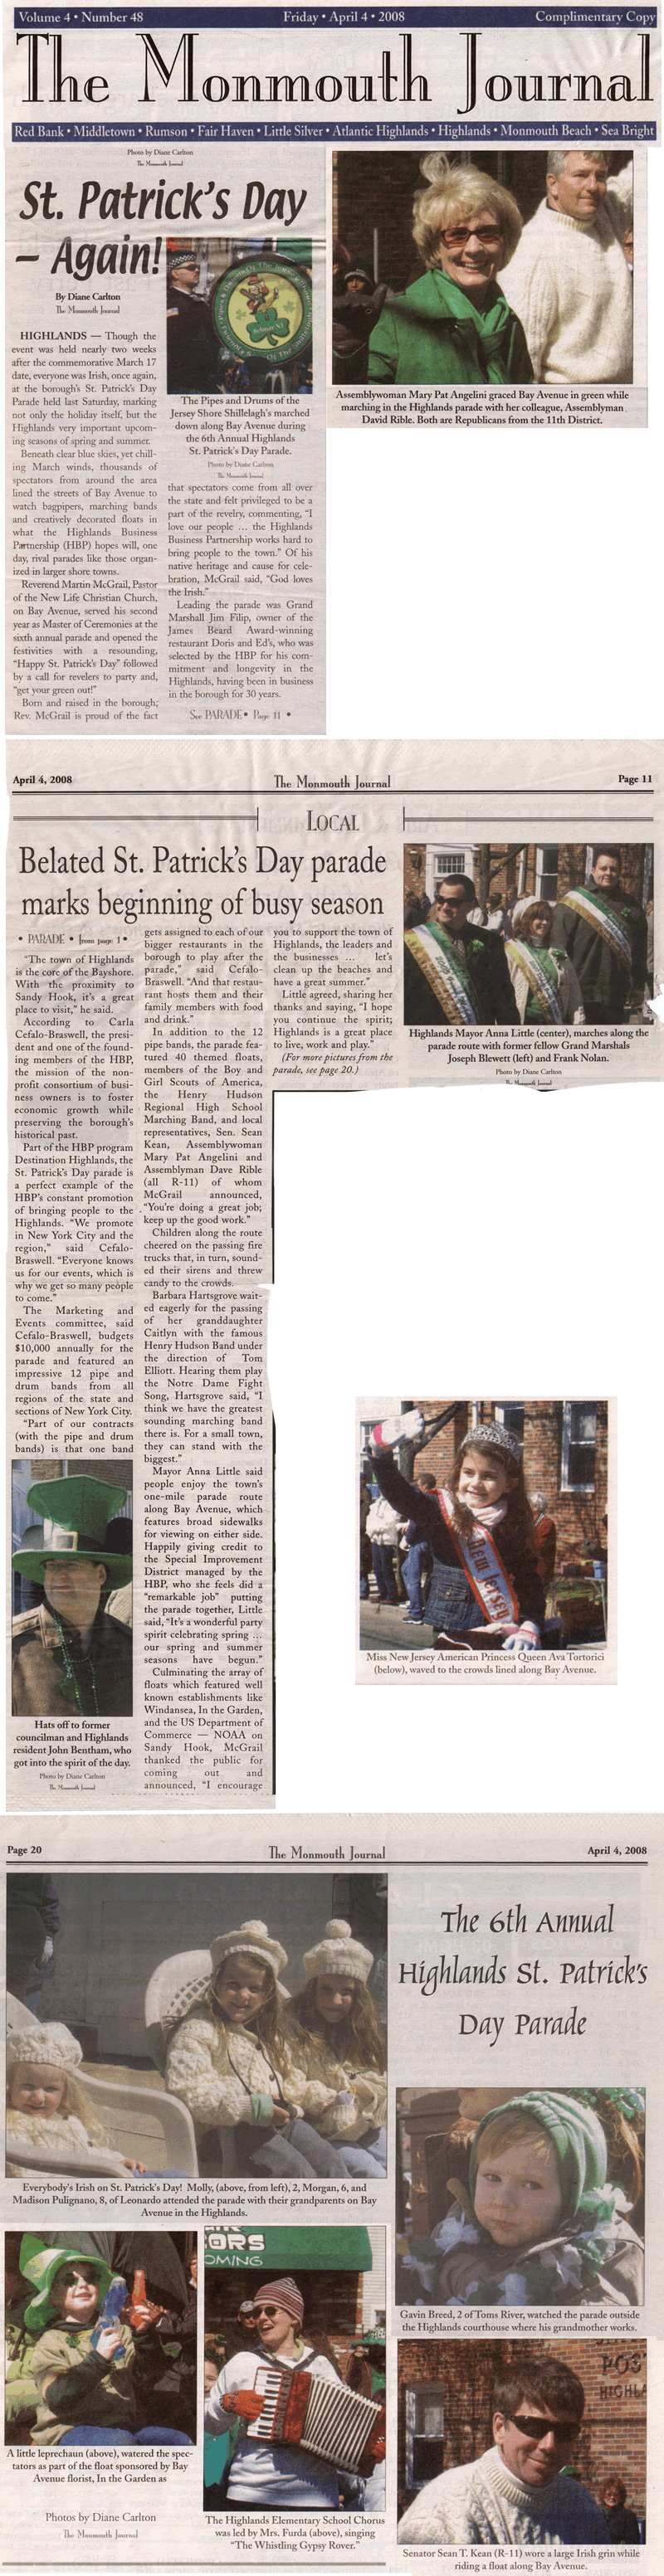 Monmouth Journal 2008-04-04 St Pats Day Parade